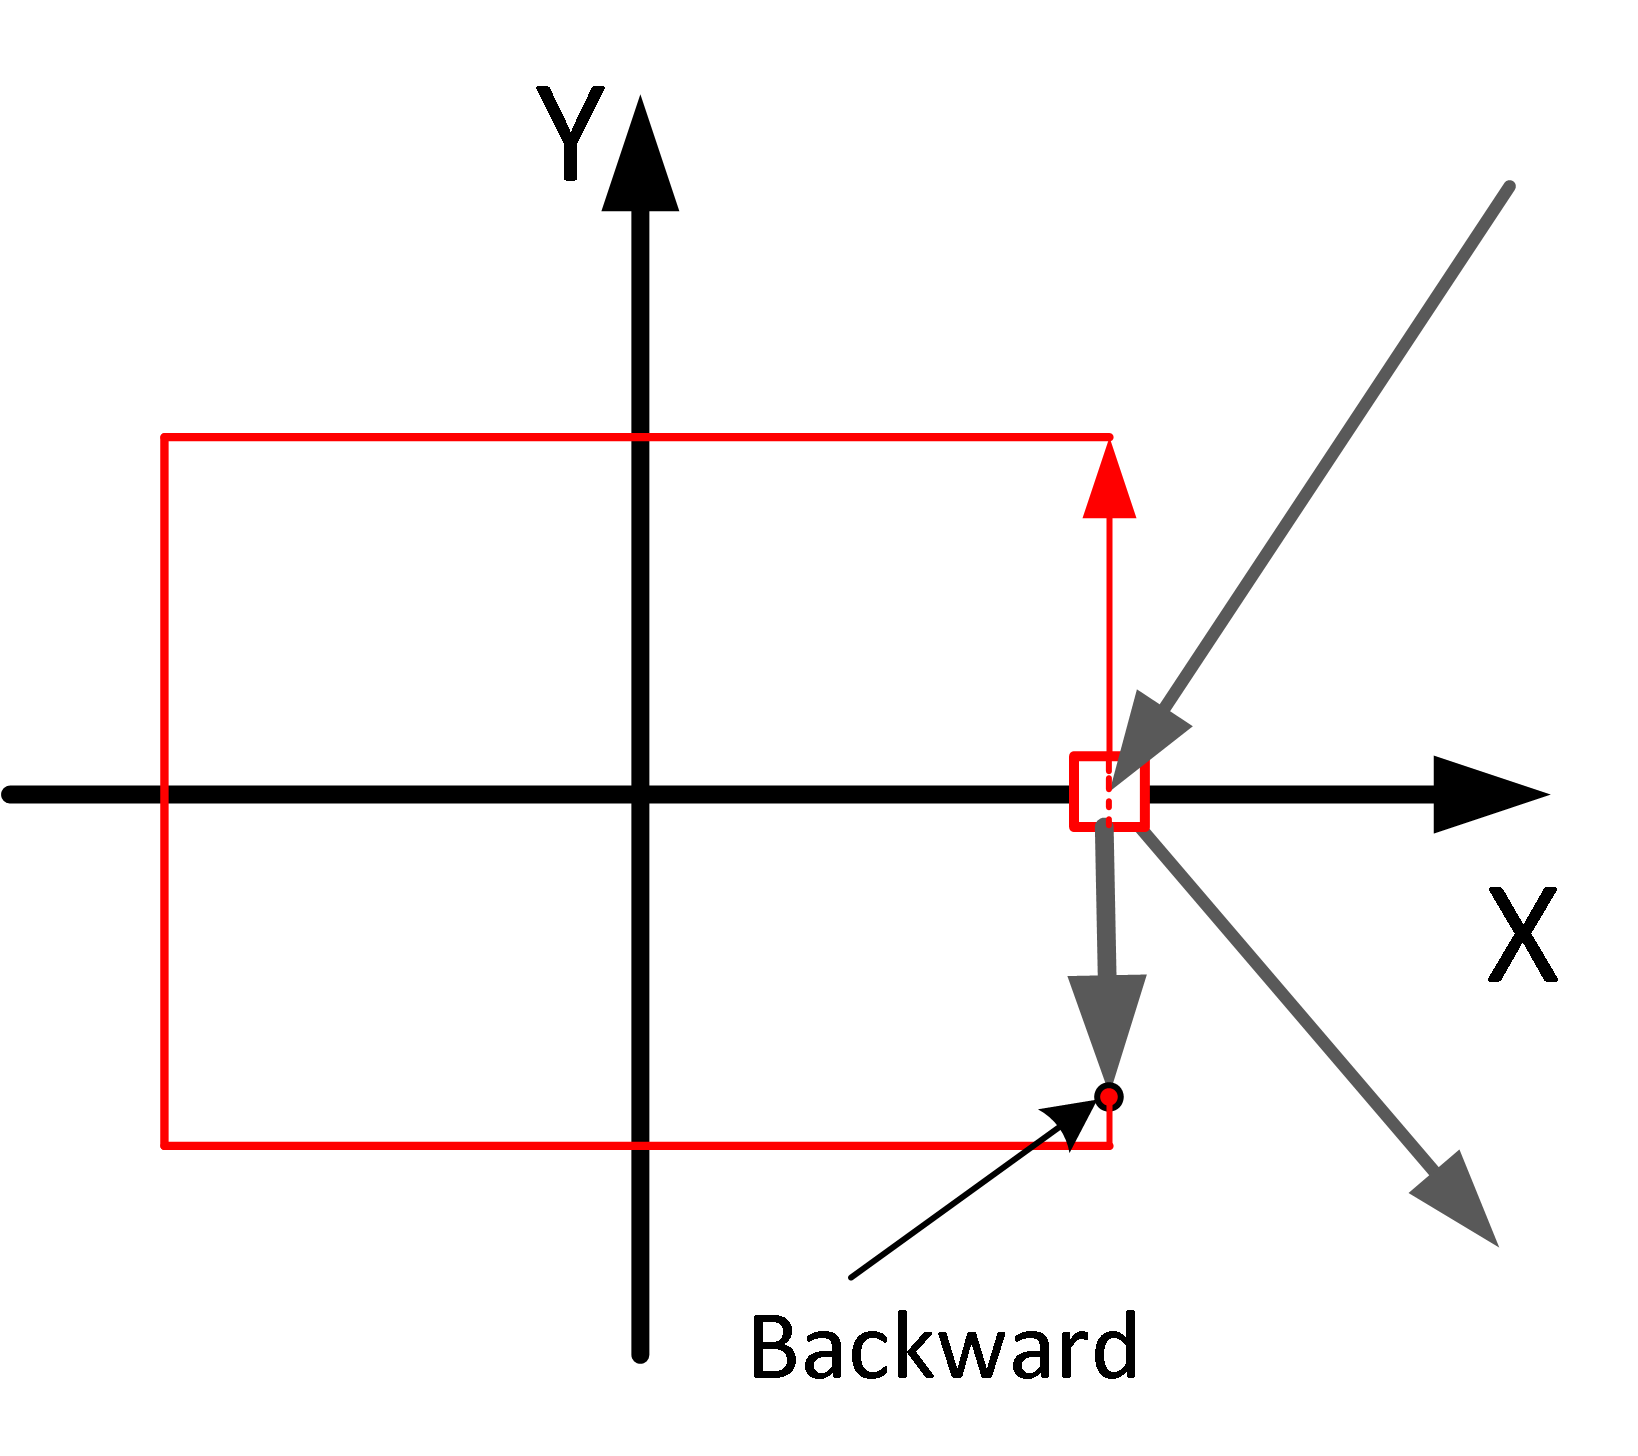 Direct backward motion immediately after loop entry